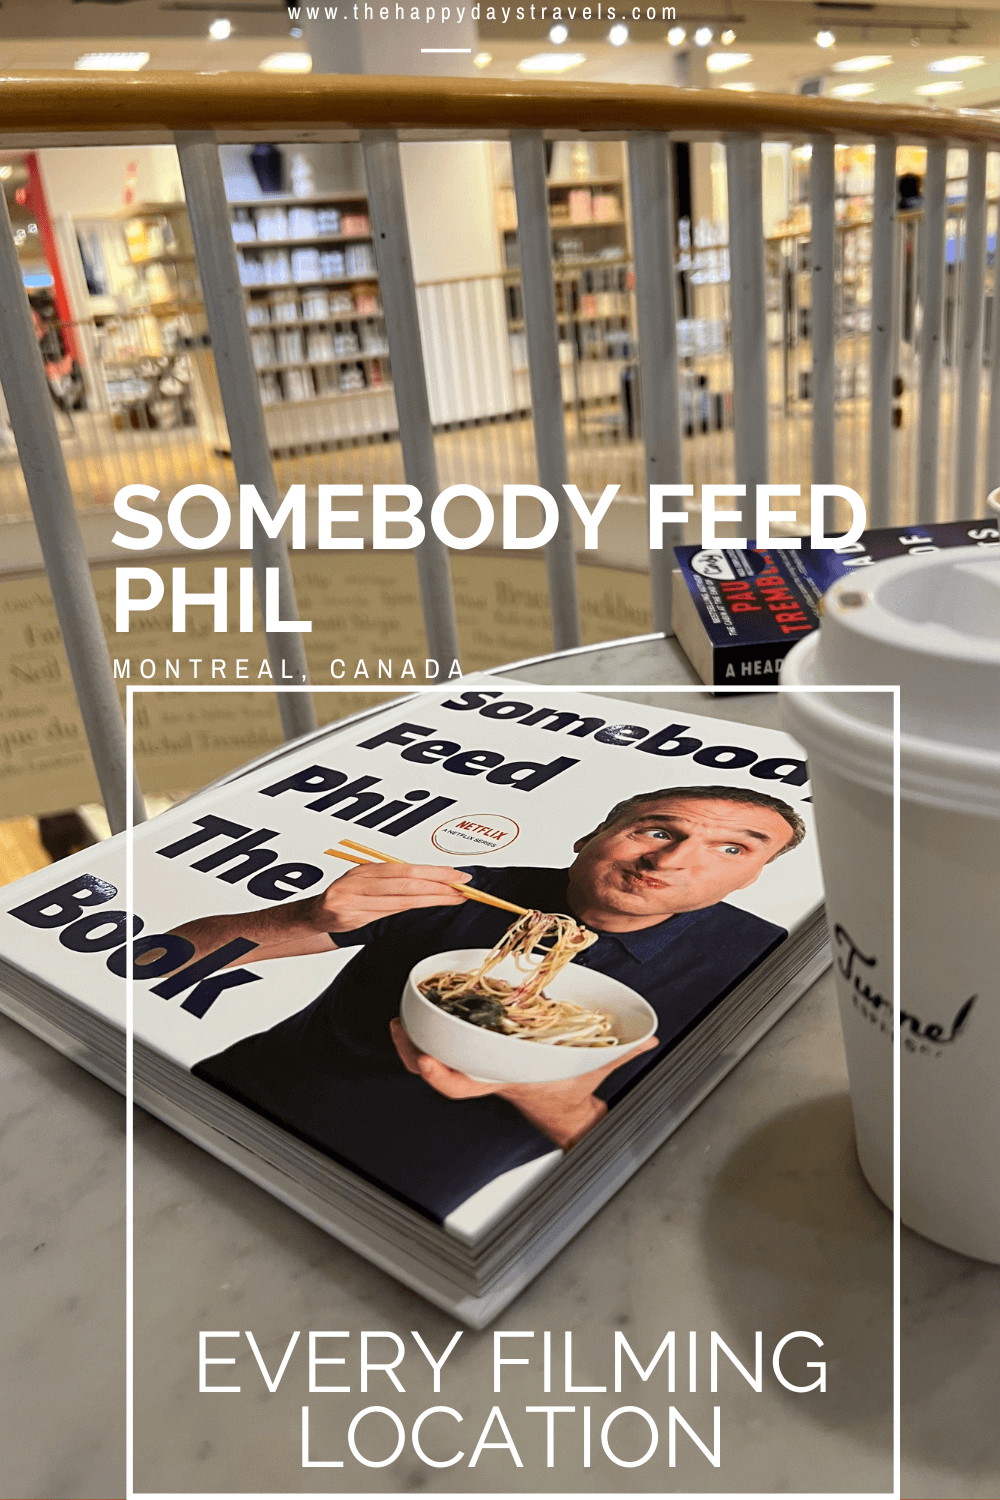 Every filming location Somebody Feed Phil Montreal Episode. Pin image of somebody feed Phil book on a coffee table with a coffee in Montreal book store Canada